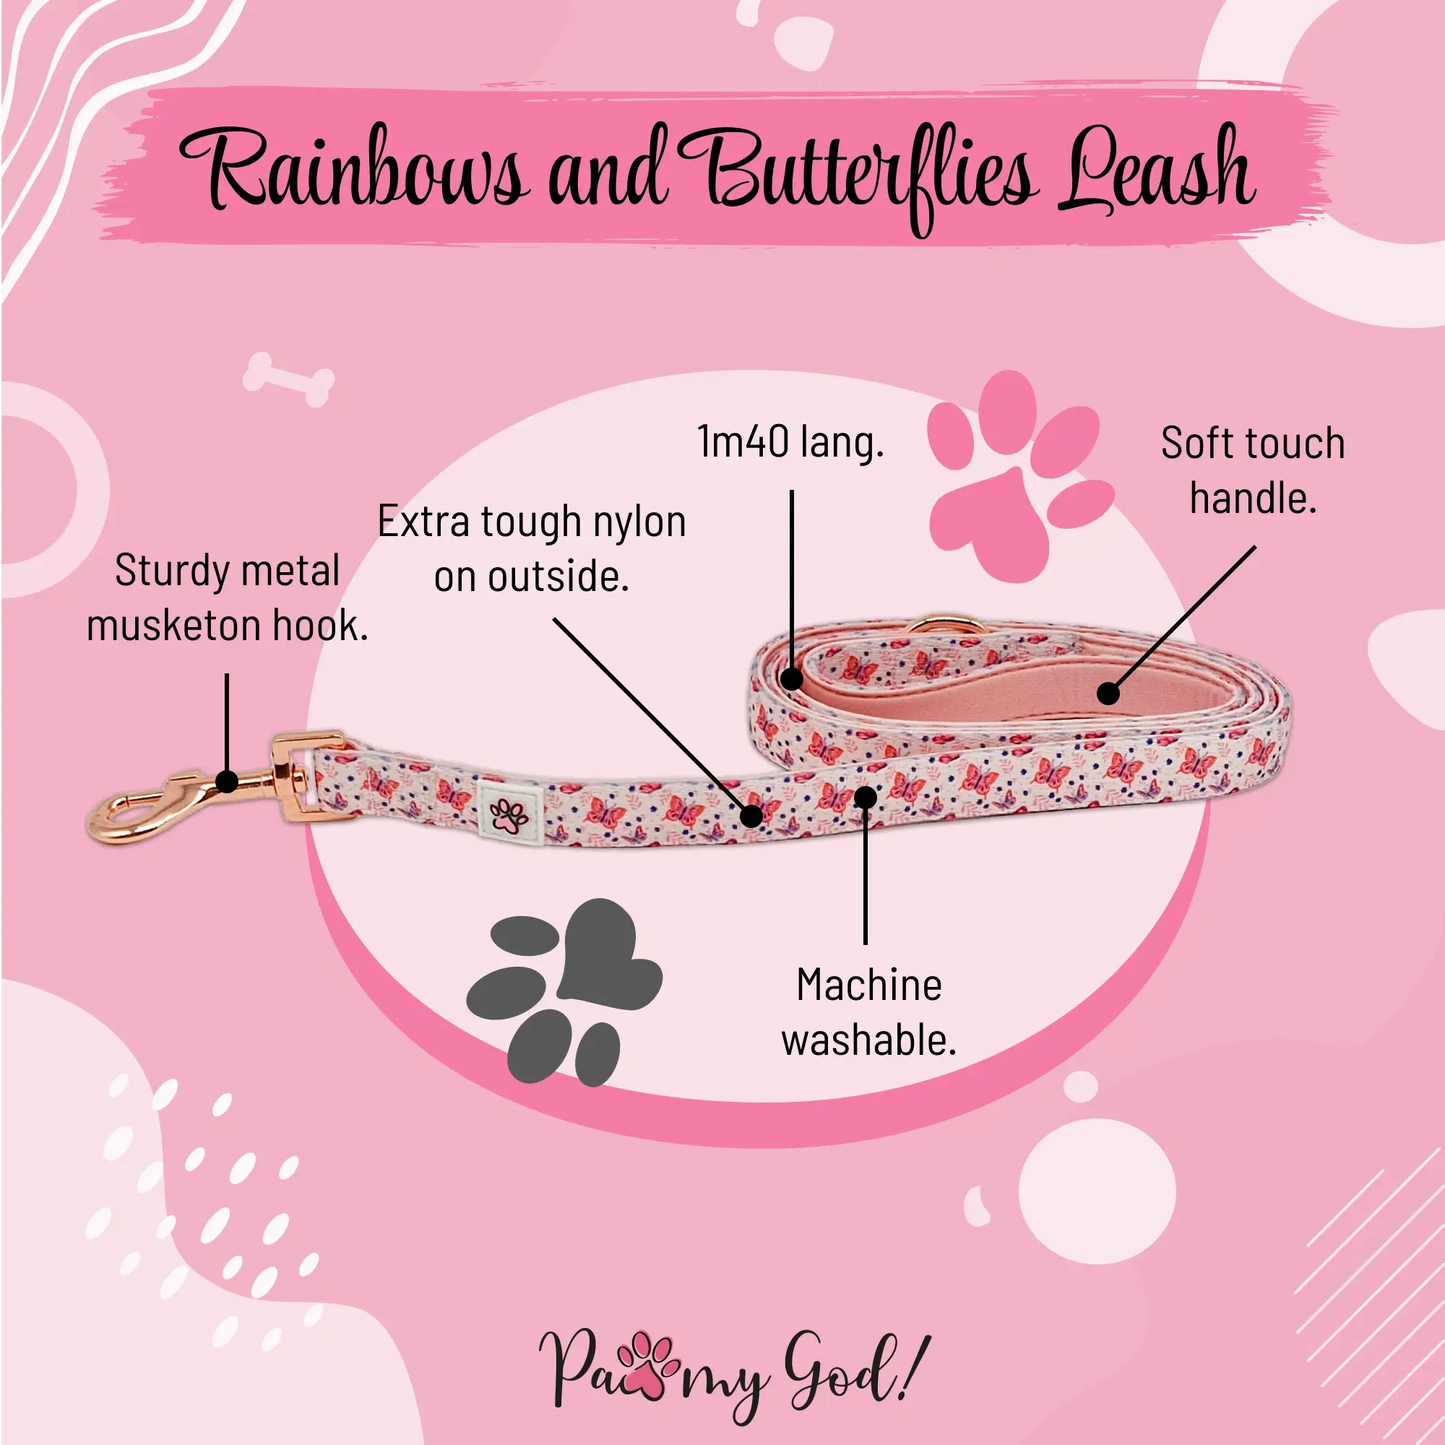 Rainbows and Butterflies Cloth Leash Features